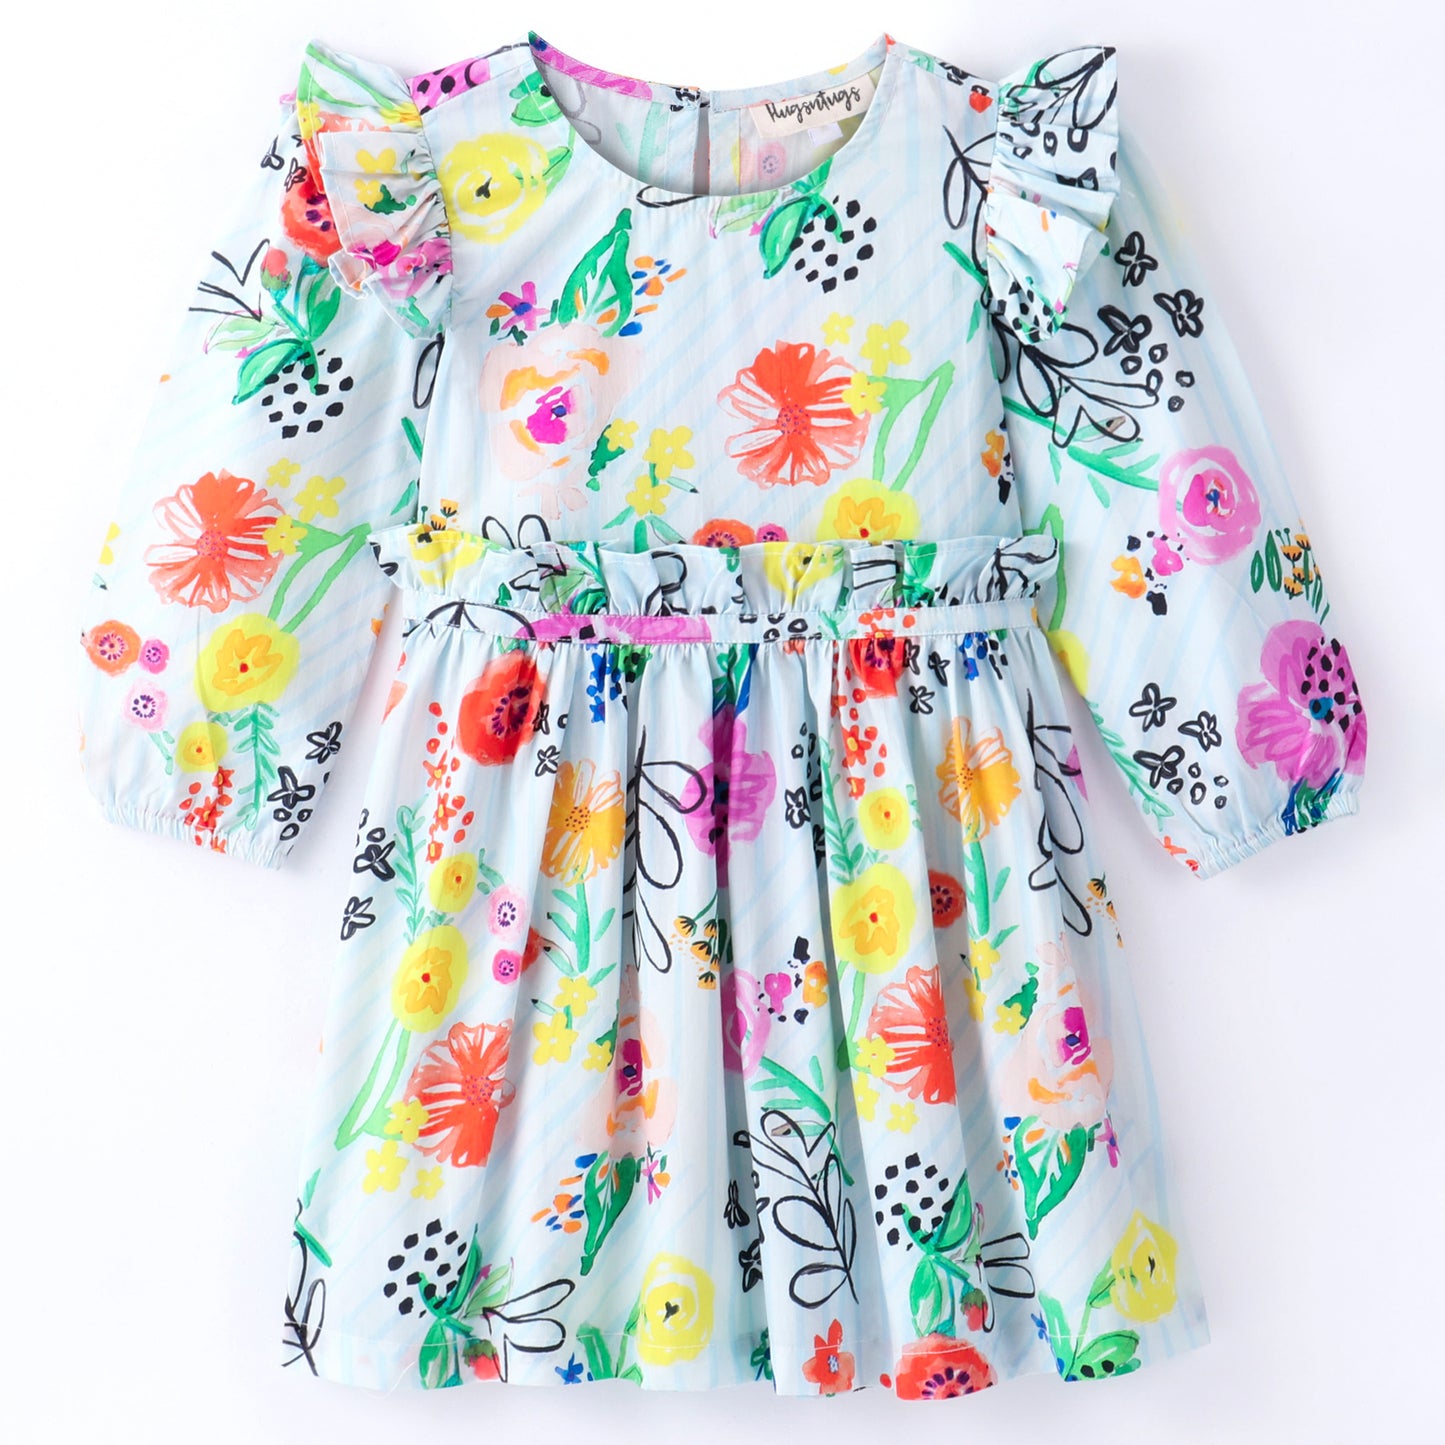 Full Sleeves Watercolor Effect Flowers Printed & Candy Striped Frill Detailed Fit & Flare Dress - White & Multi Color